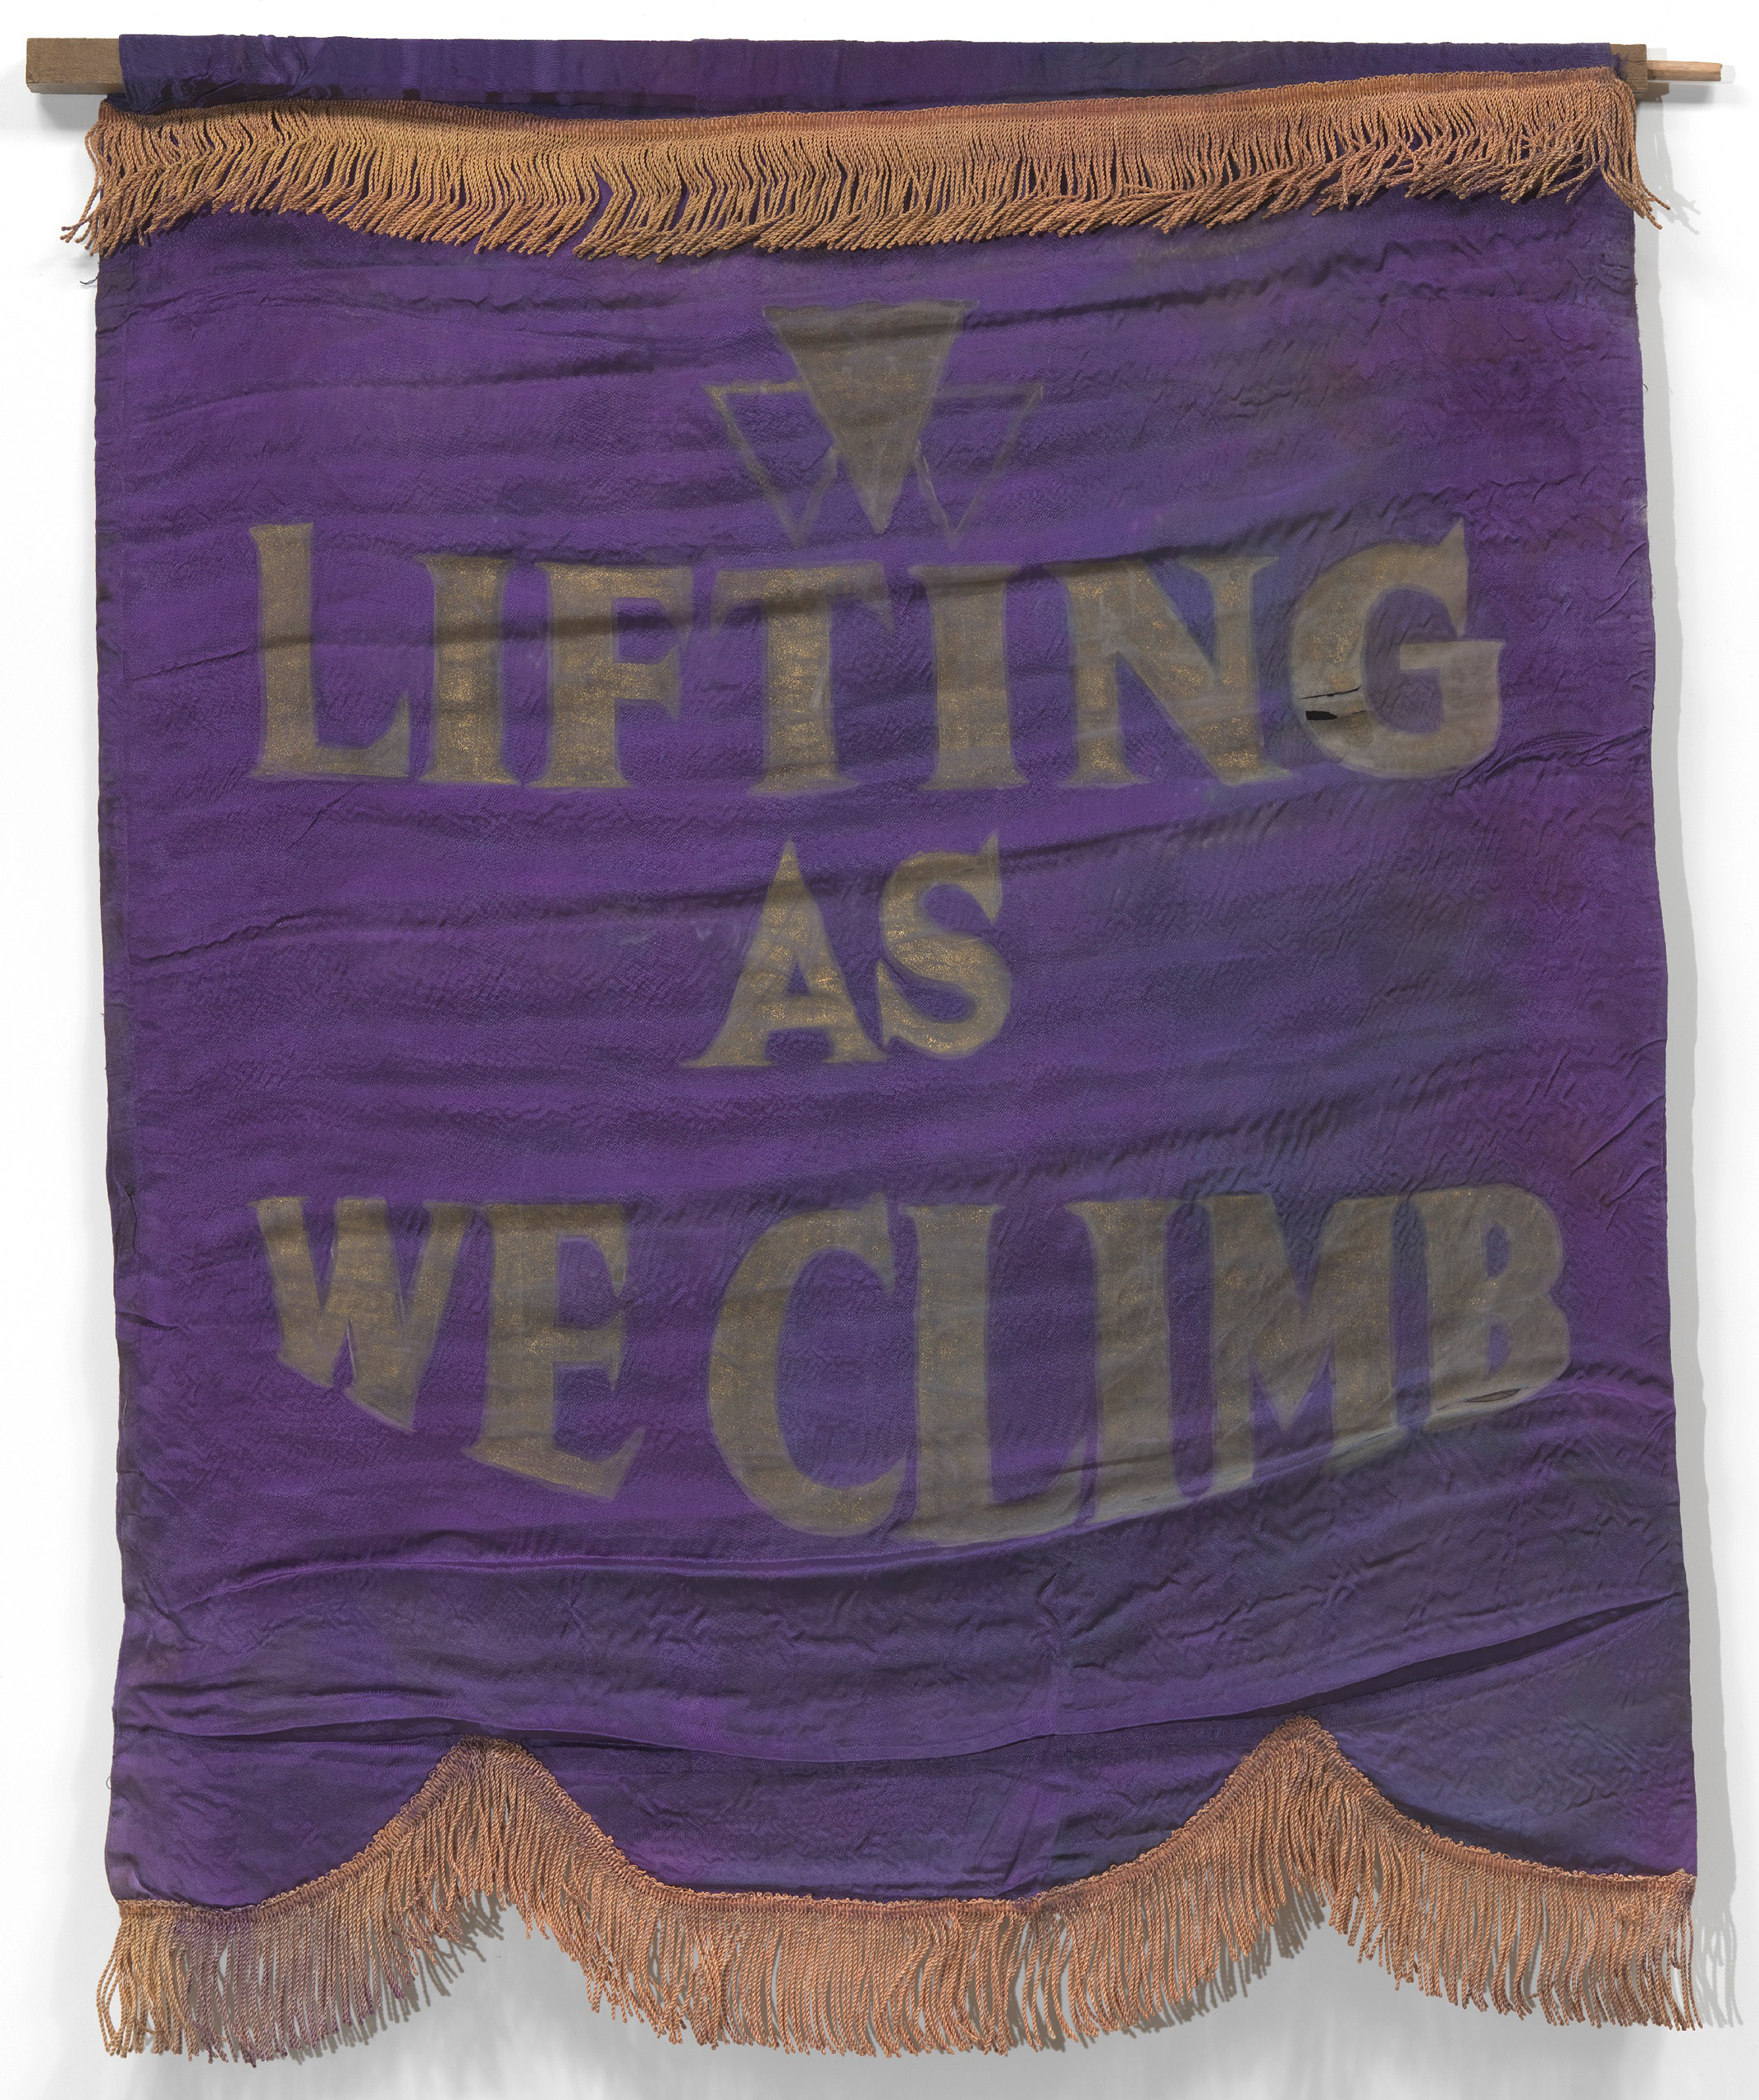 Oklahoma Federation of Colored Women's Clubs Banner, ca. 1924.